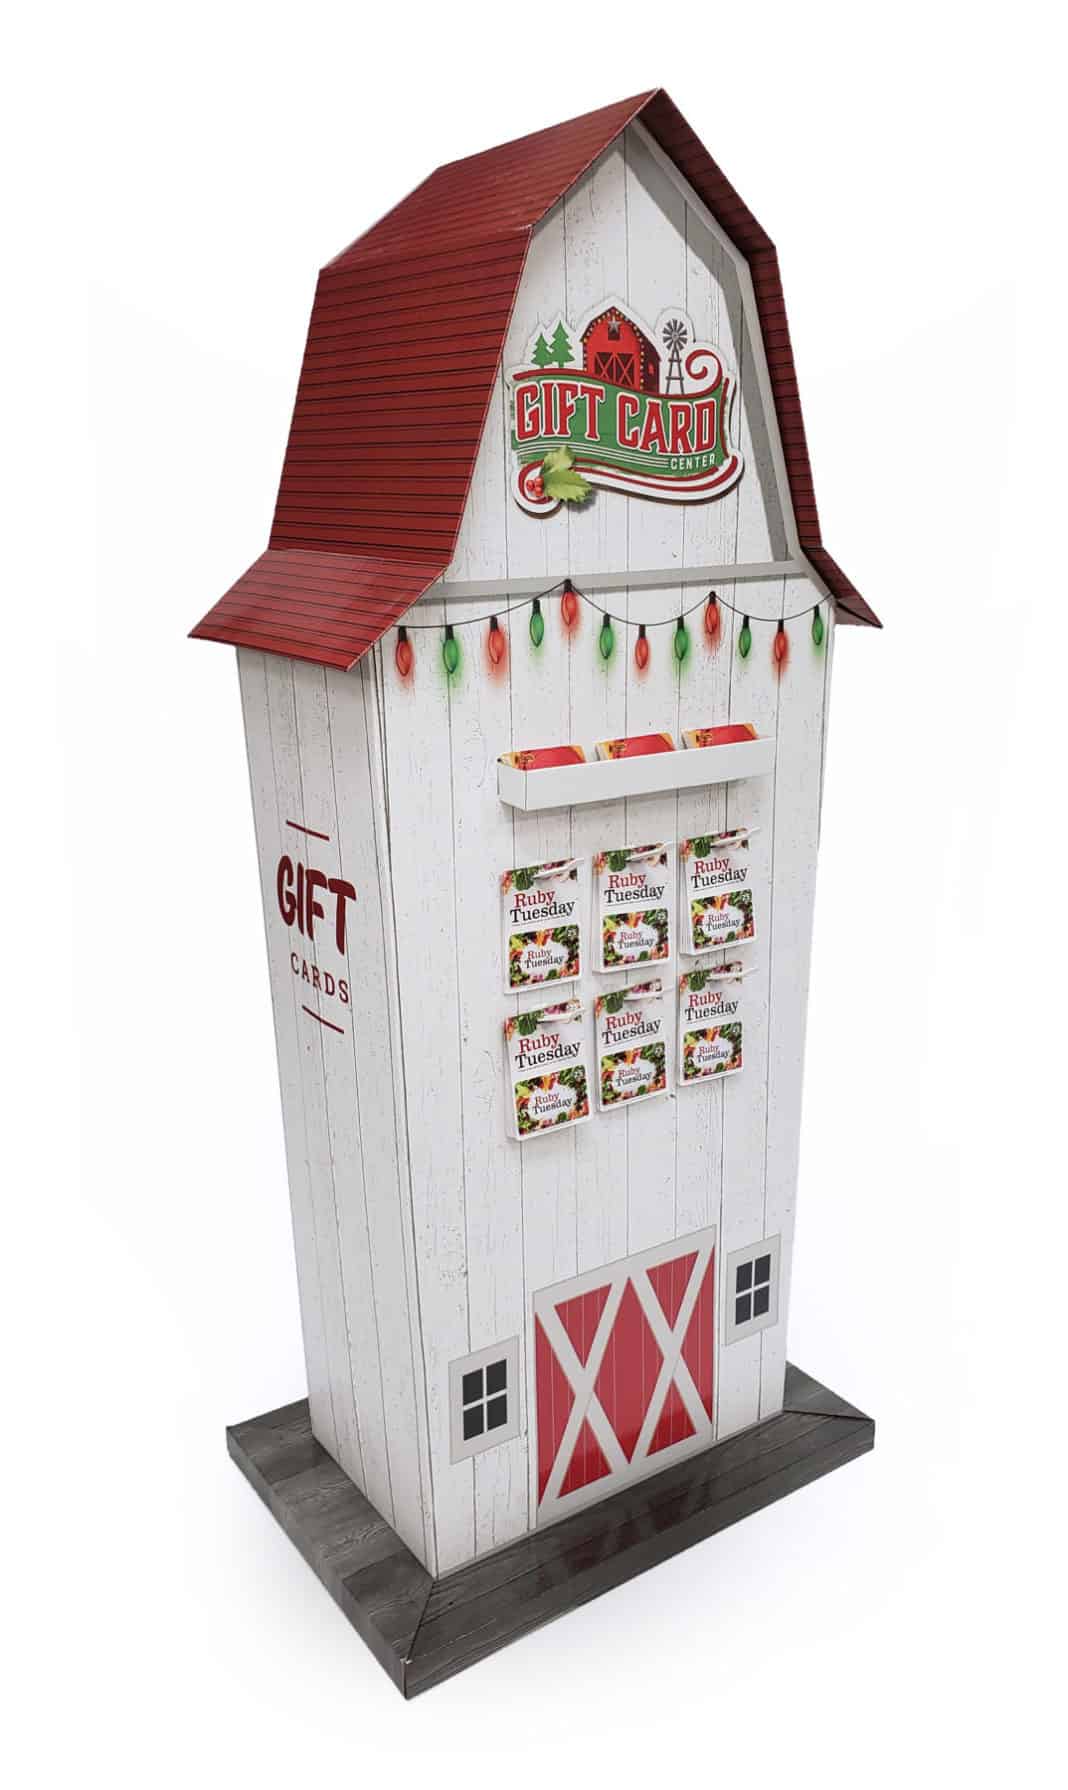 Tall giftcard display shaped like a white barn with a red roof